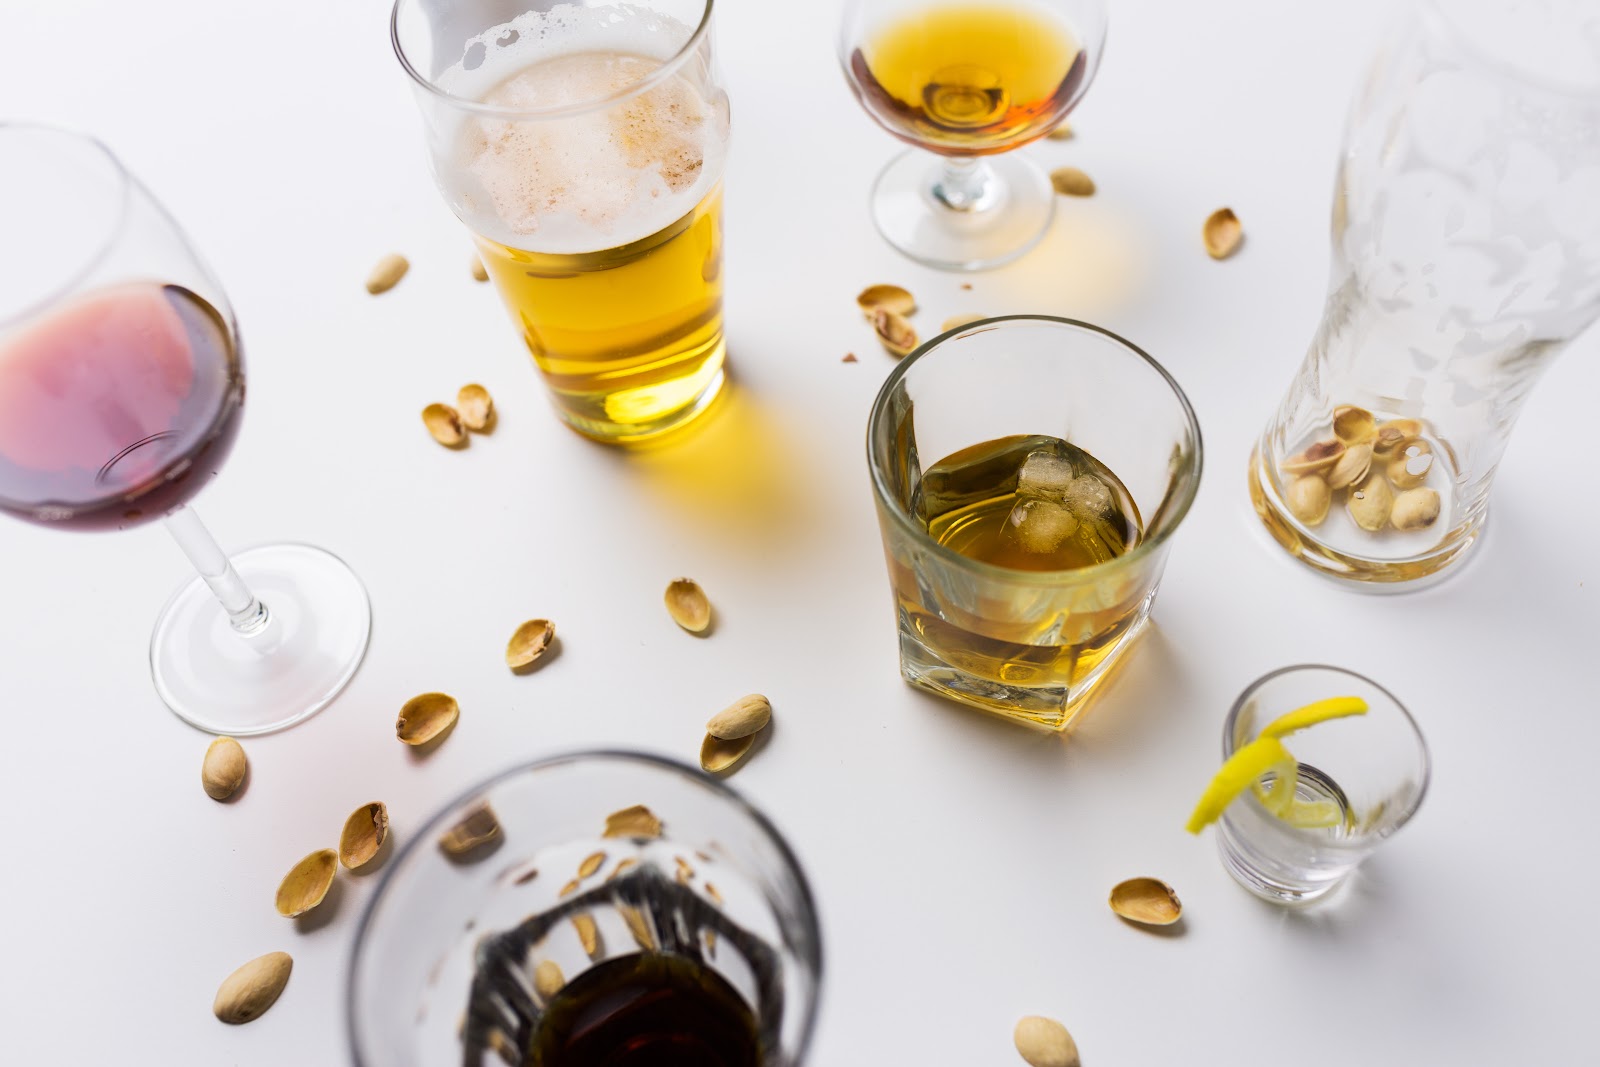 Dangerous Implications of Mixing Vicodin and Alcohol